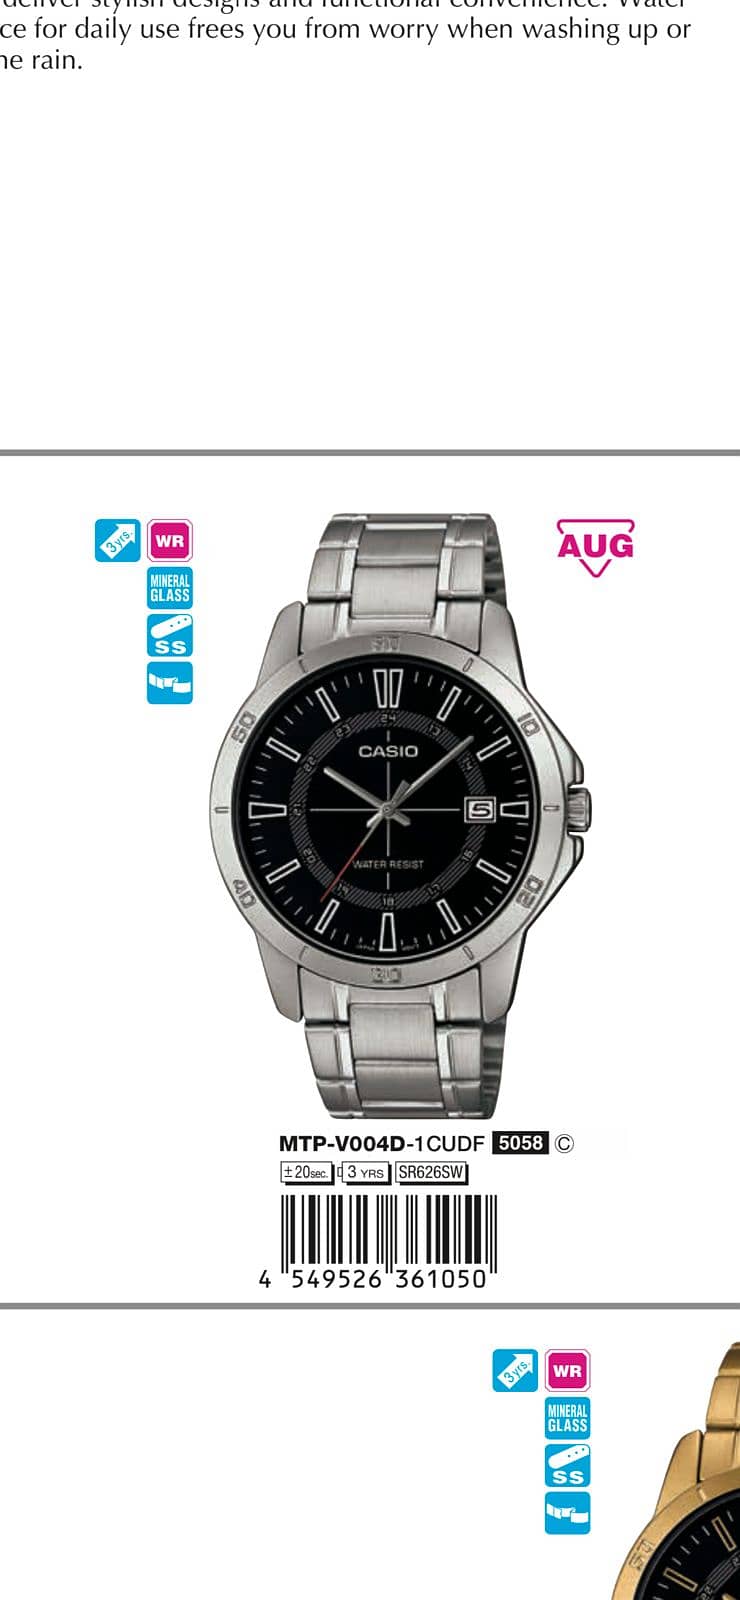 Casio watches on discounted prices 9